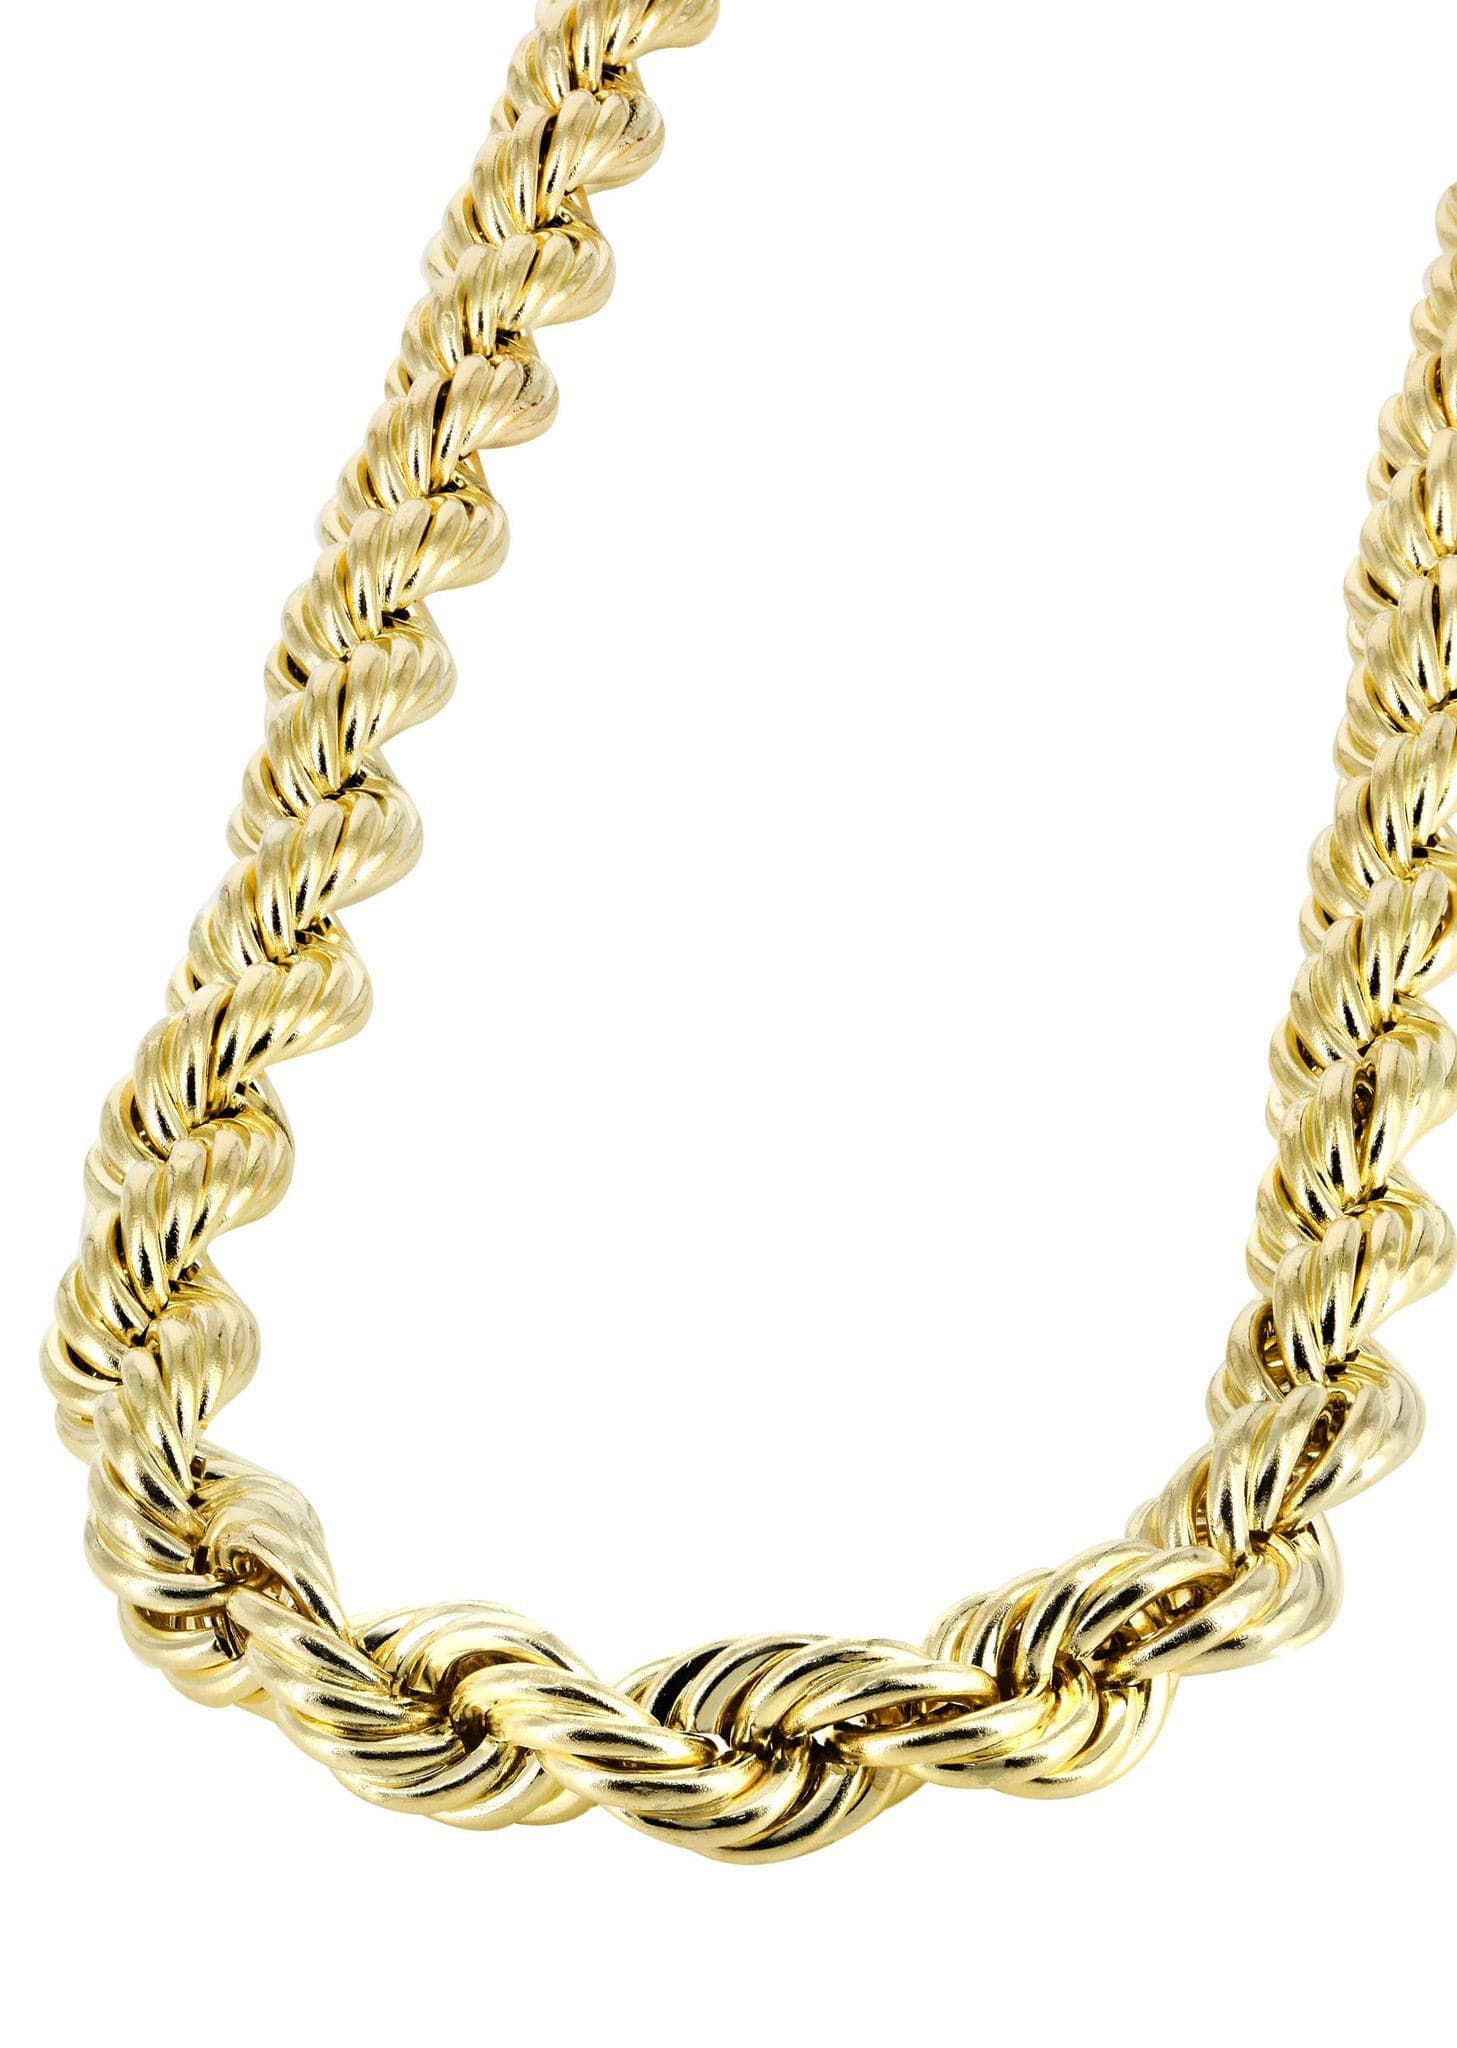 Gold Chain - Mens Hollow Rope Chain 10K 